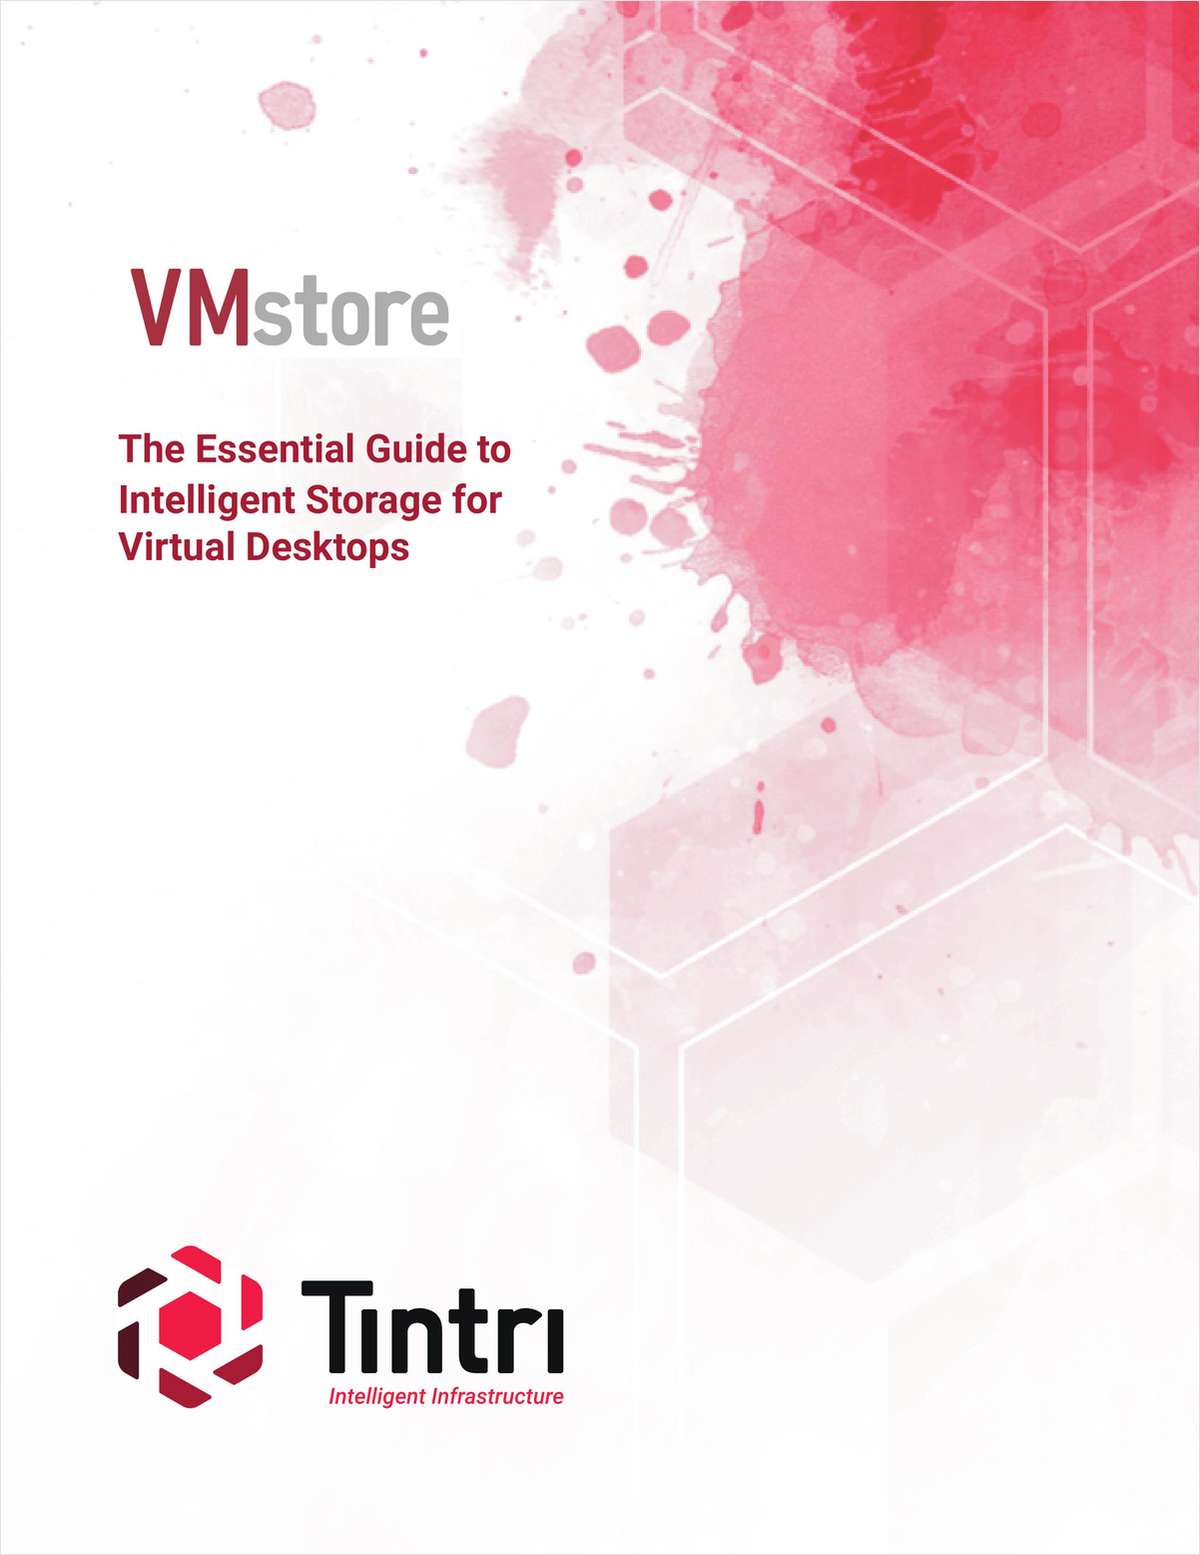 The Essential Guide to Intelligent Storage for VDI Desktops